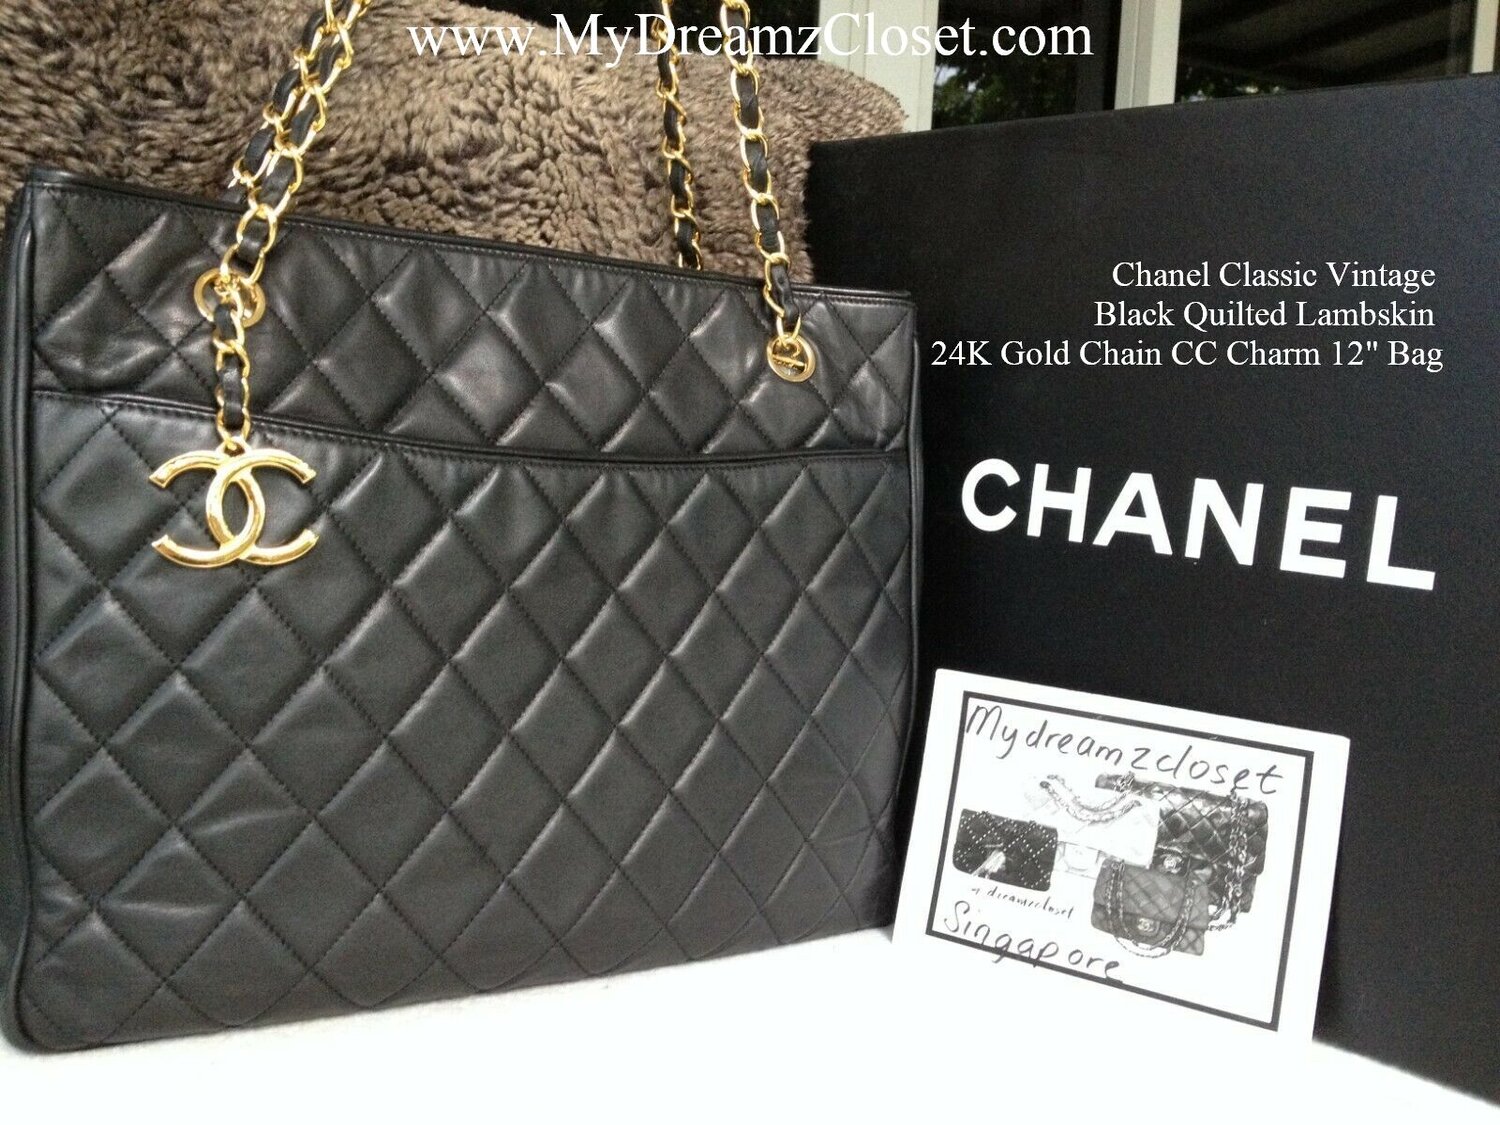 Chanel Classic Vintage Black Quilted Lambskin 24K Gold Chain CC